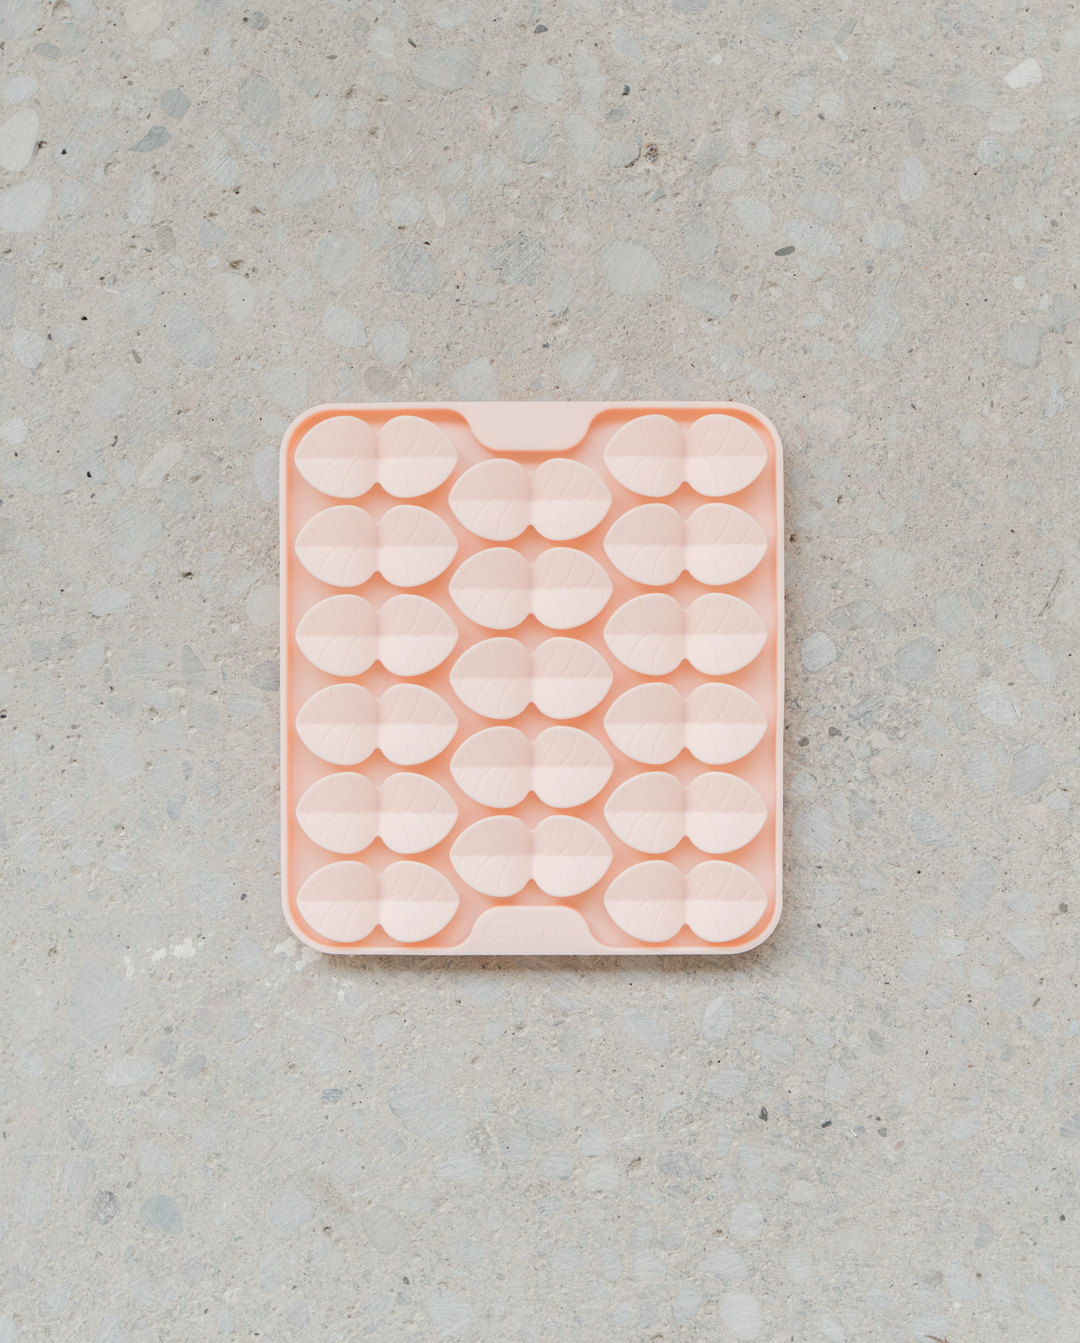 dexypaws - Blush Pink Silicone Snuffle Mat